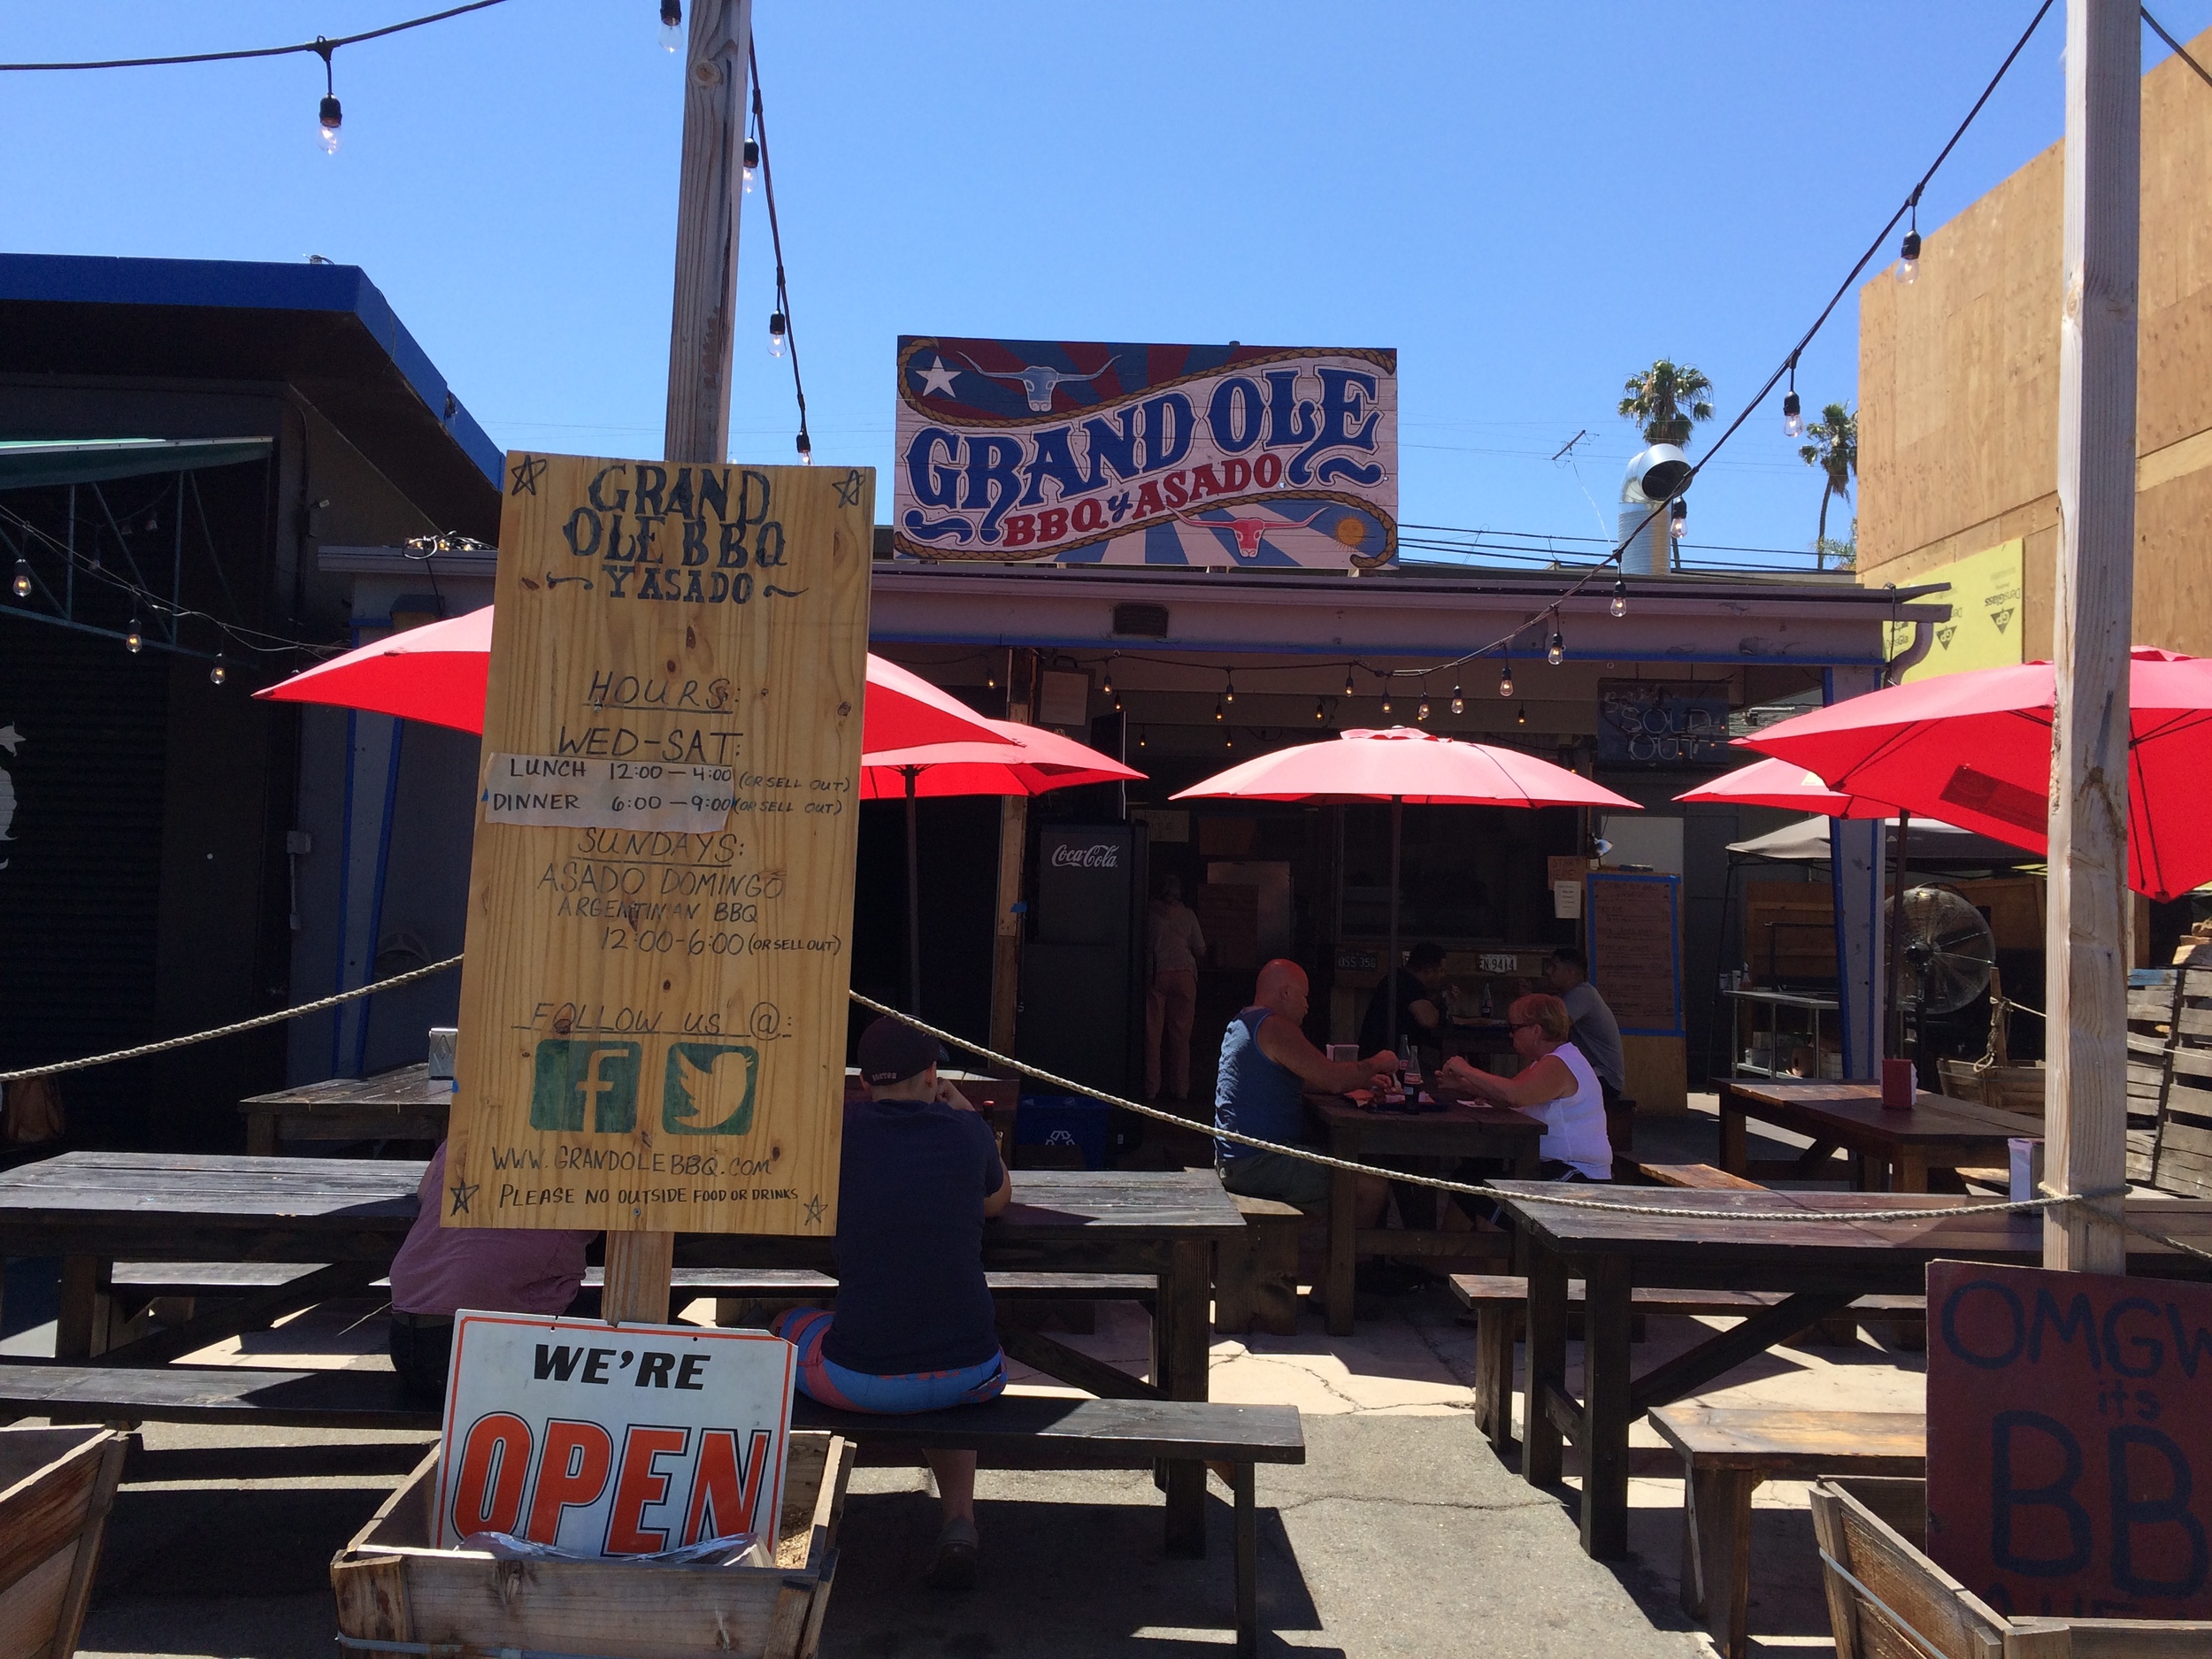 San Diego Gets a Real BBQ Joint - Grand BBQ y Asado — Local Wally's Guide San Diego